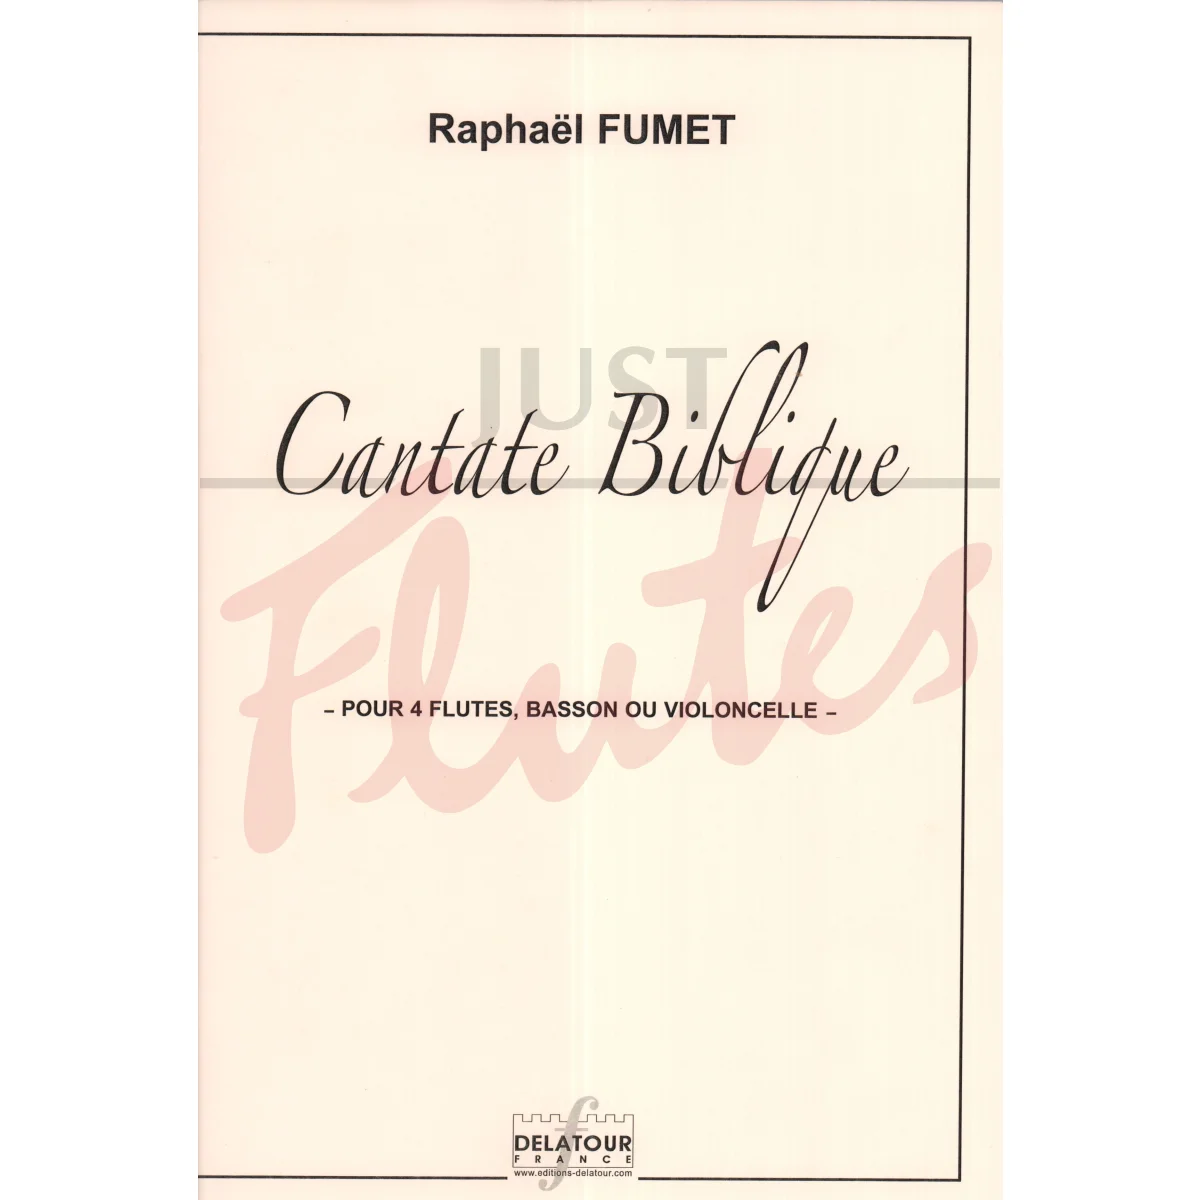 Cantate Biblique for Four Flutes and Cello/Bassoon